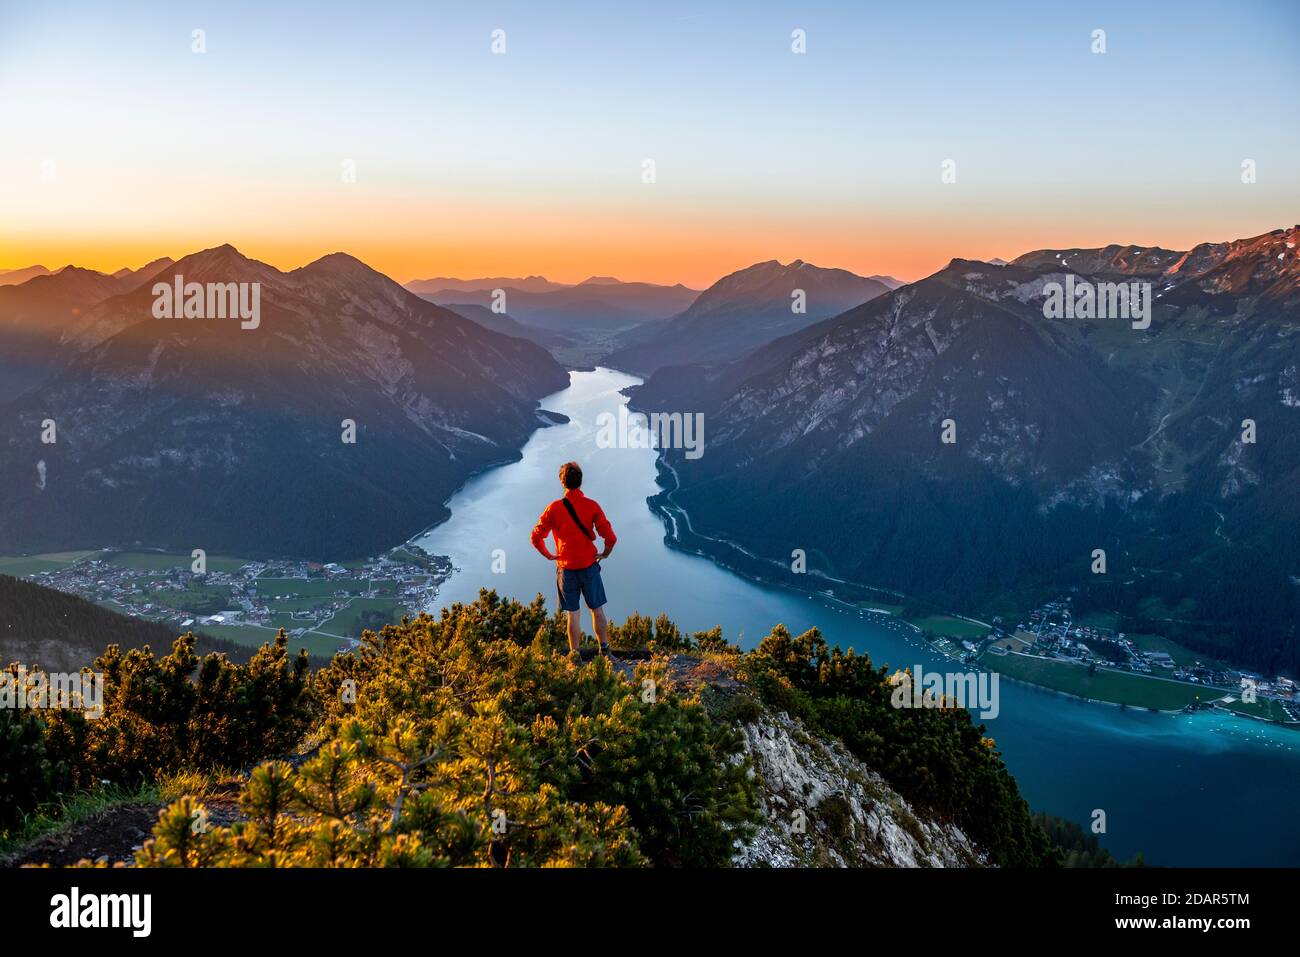 Sunset, young man looking over mountain landscape, view from the top of the Baerenkopf to the Achensee, left Seebergspitze and Seekarspitze, right Stock Photo